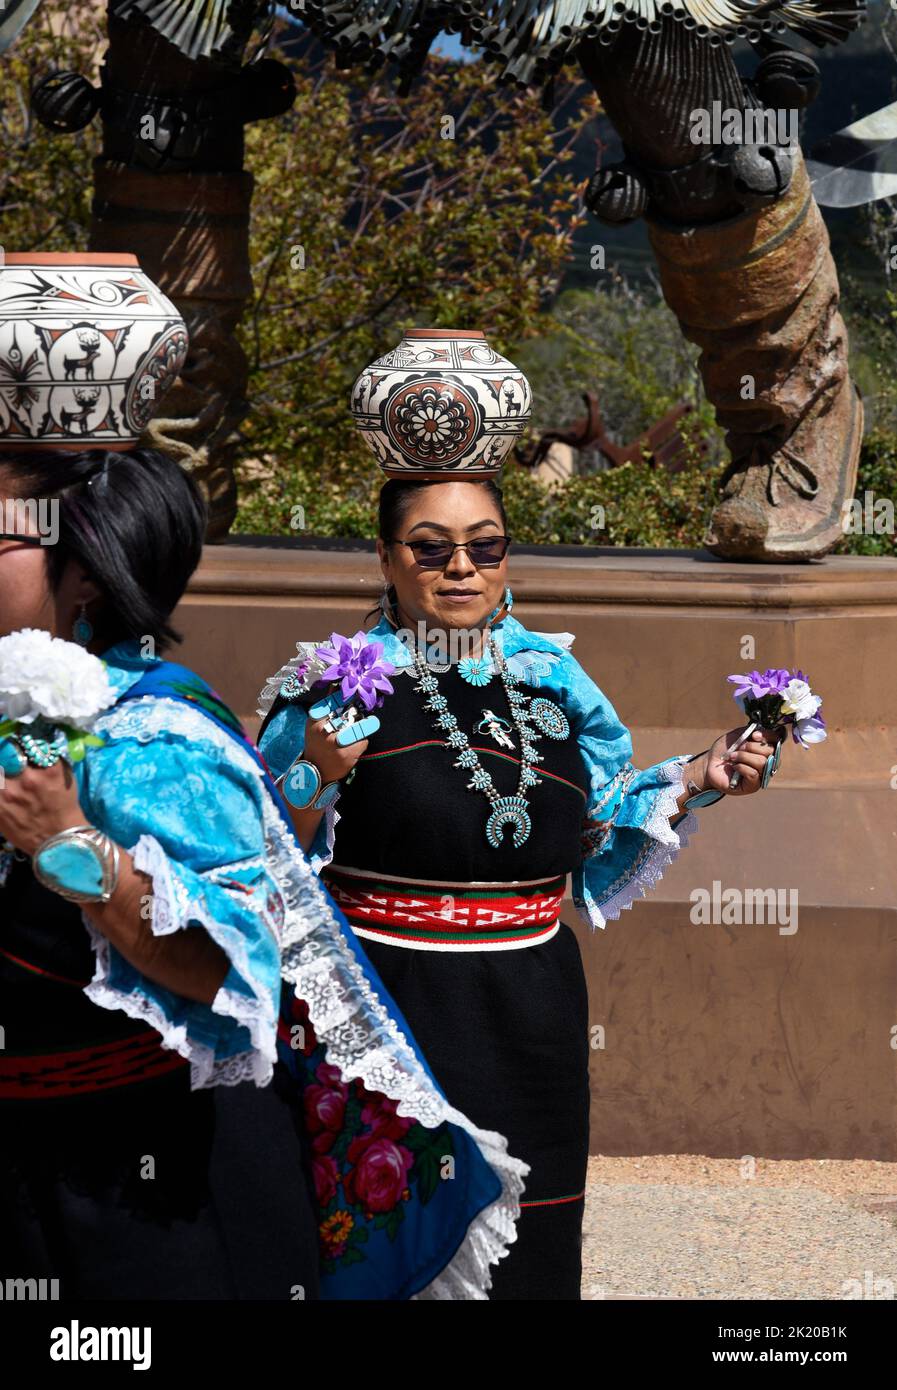 Native American members of the Zuni Olla Maidens from the Zuni Pueblo near Gallup, New Mexico, perform in a public event in Santa Fe, New Mexico. Stock Photo